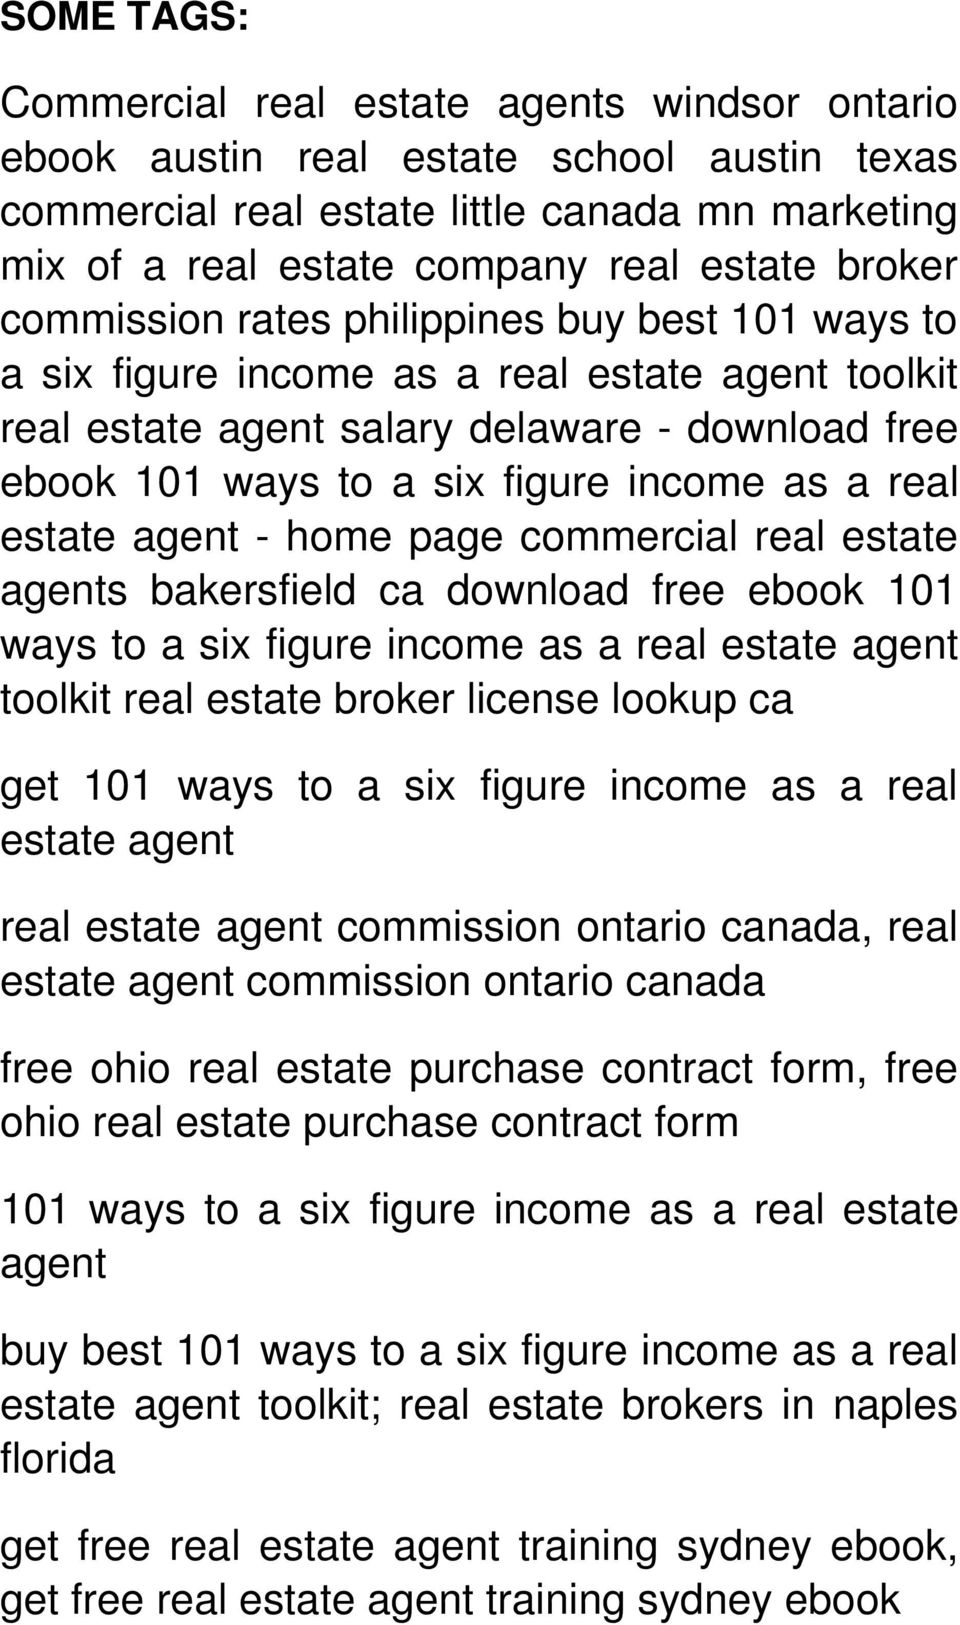 estate agent - home page commercial real estate agents bakersfield ca download free ebook 101 ways to a six figure income as a real estate agent toolkit real estate broker license lookup ca get 101